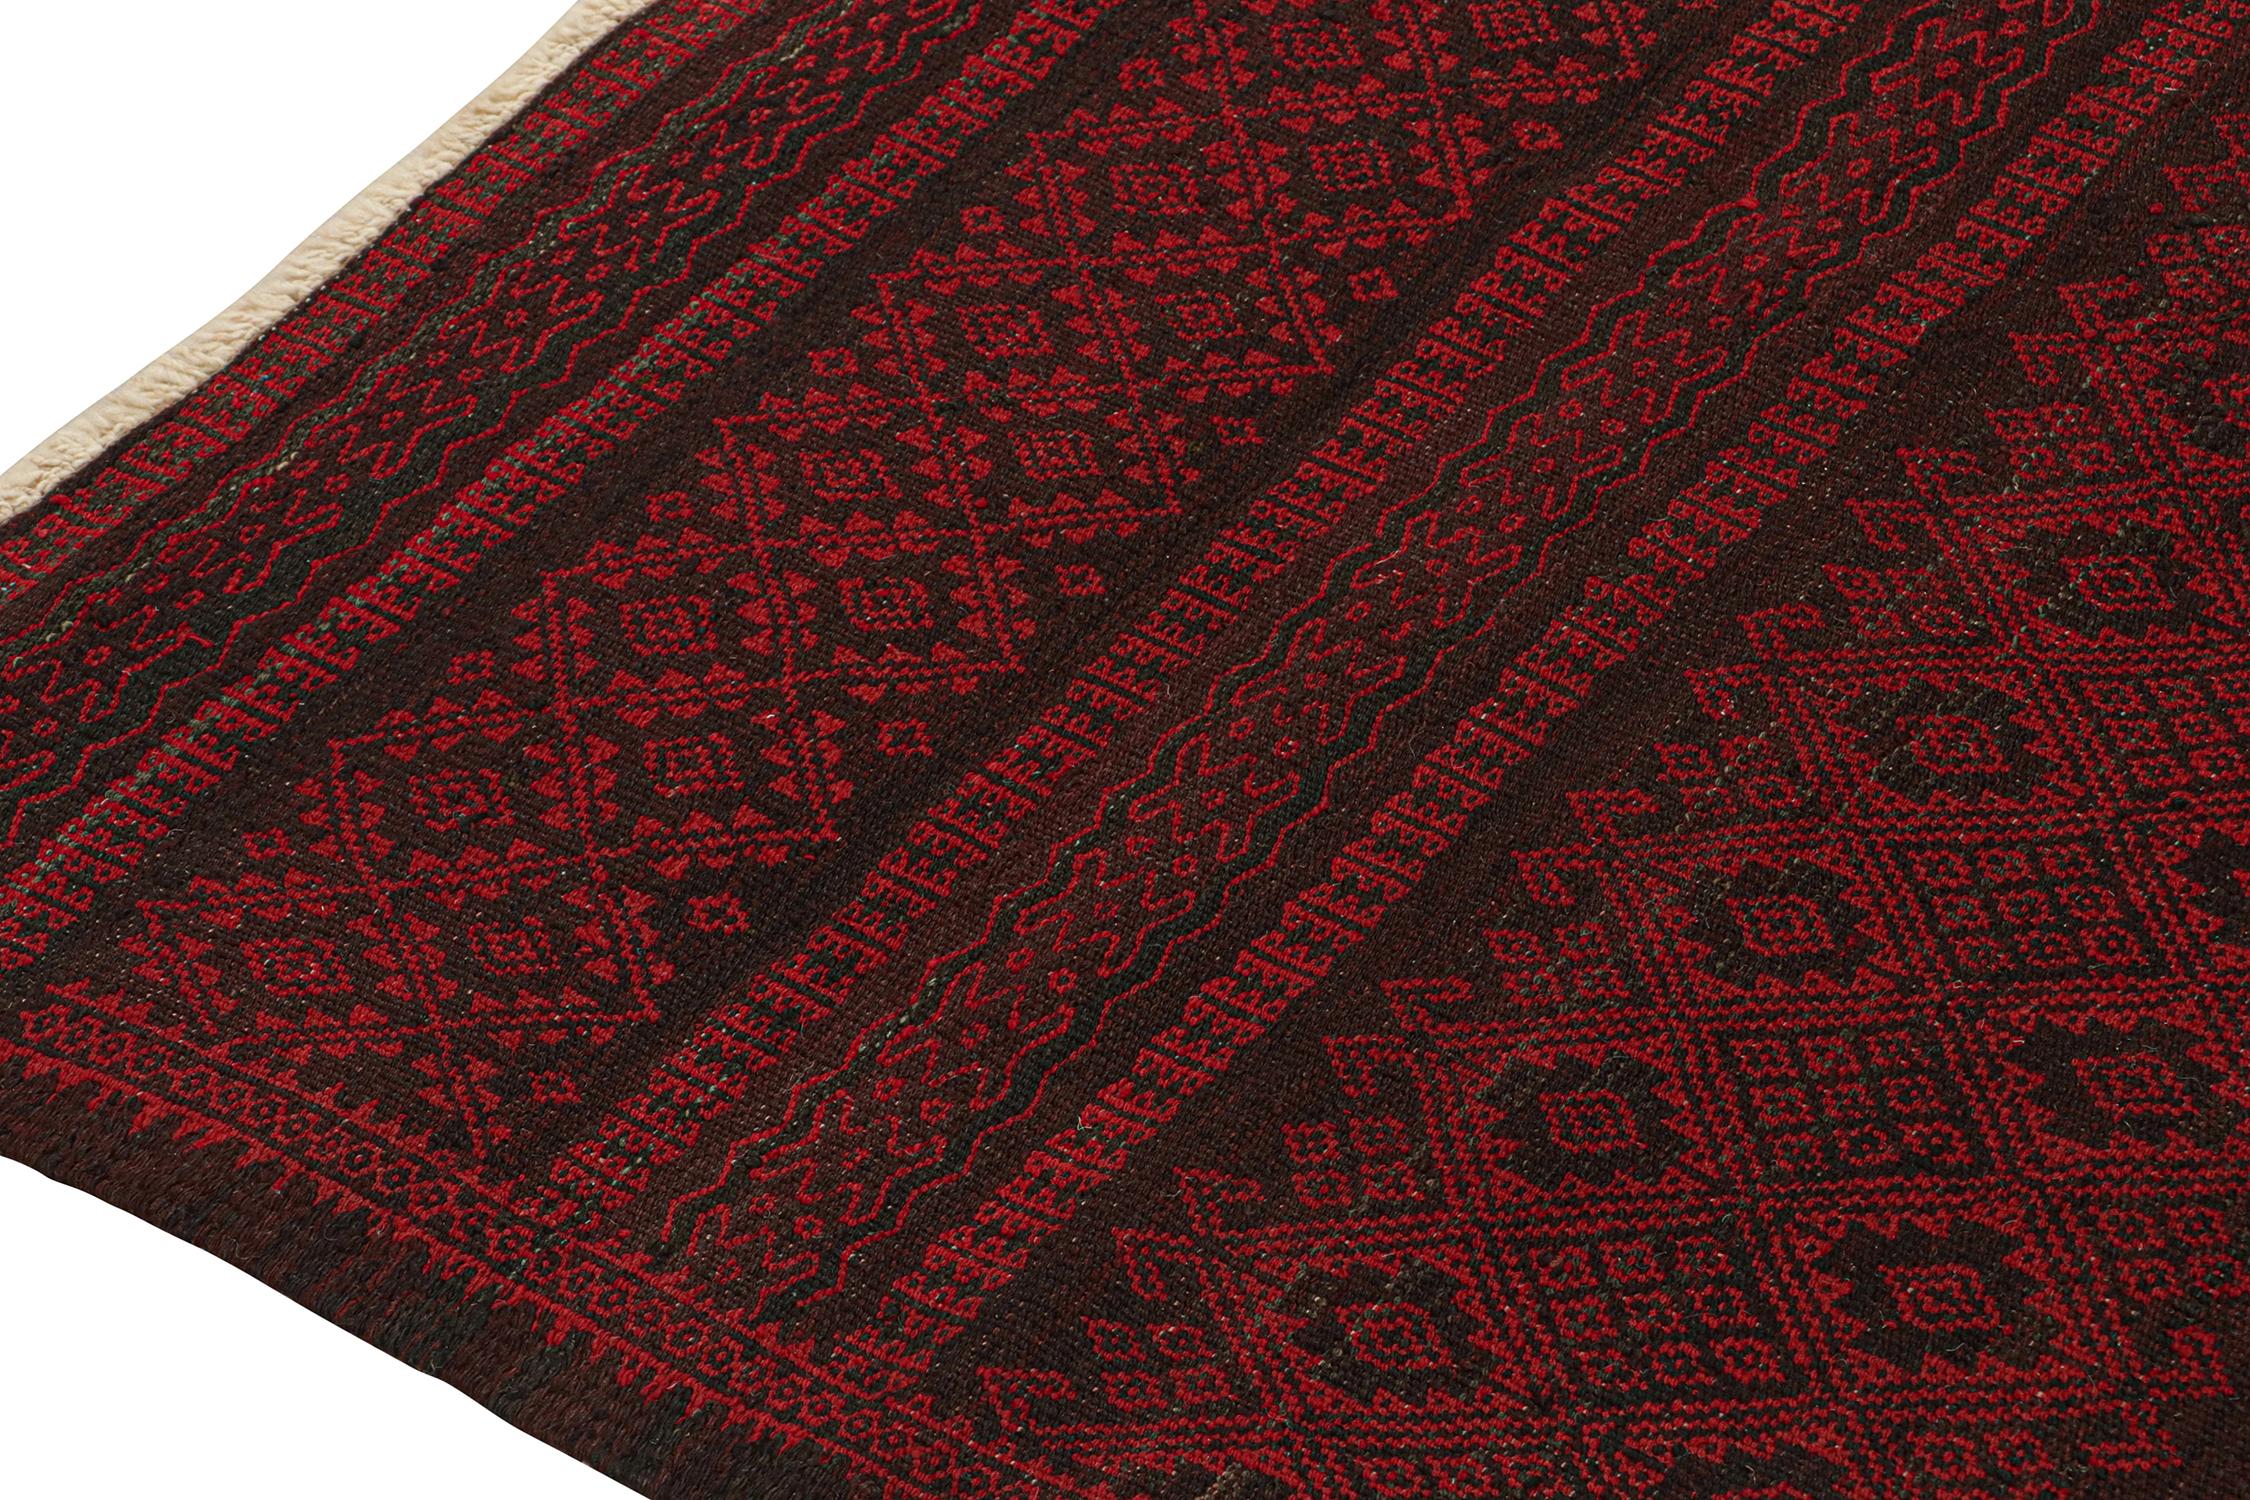 Hand-Knotted Vintage Persian Kilim in Red and Black Geometric Patterns by Rug & Kilim For Sale